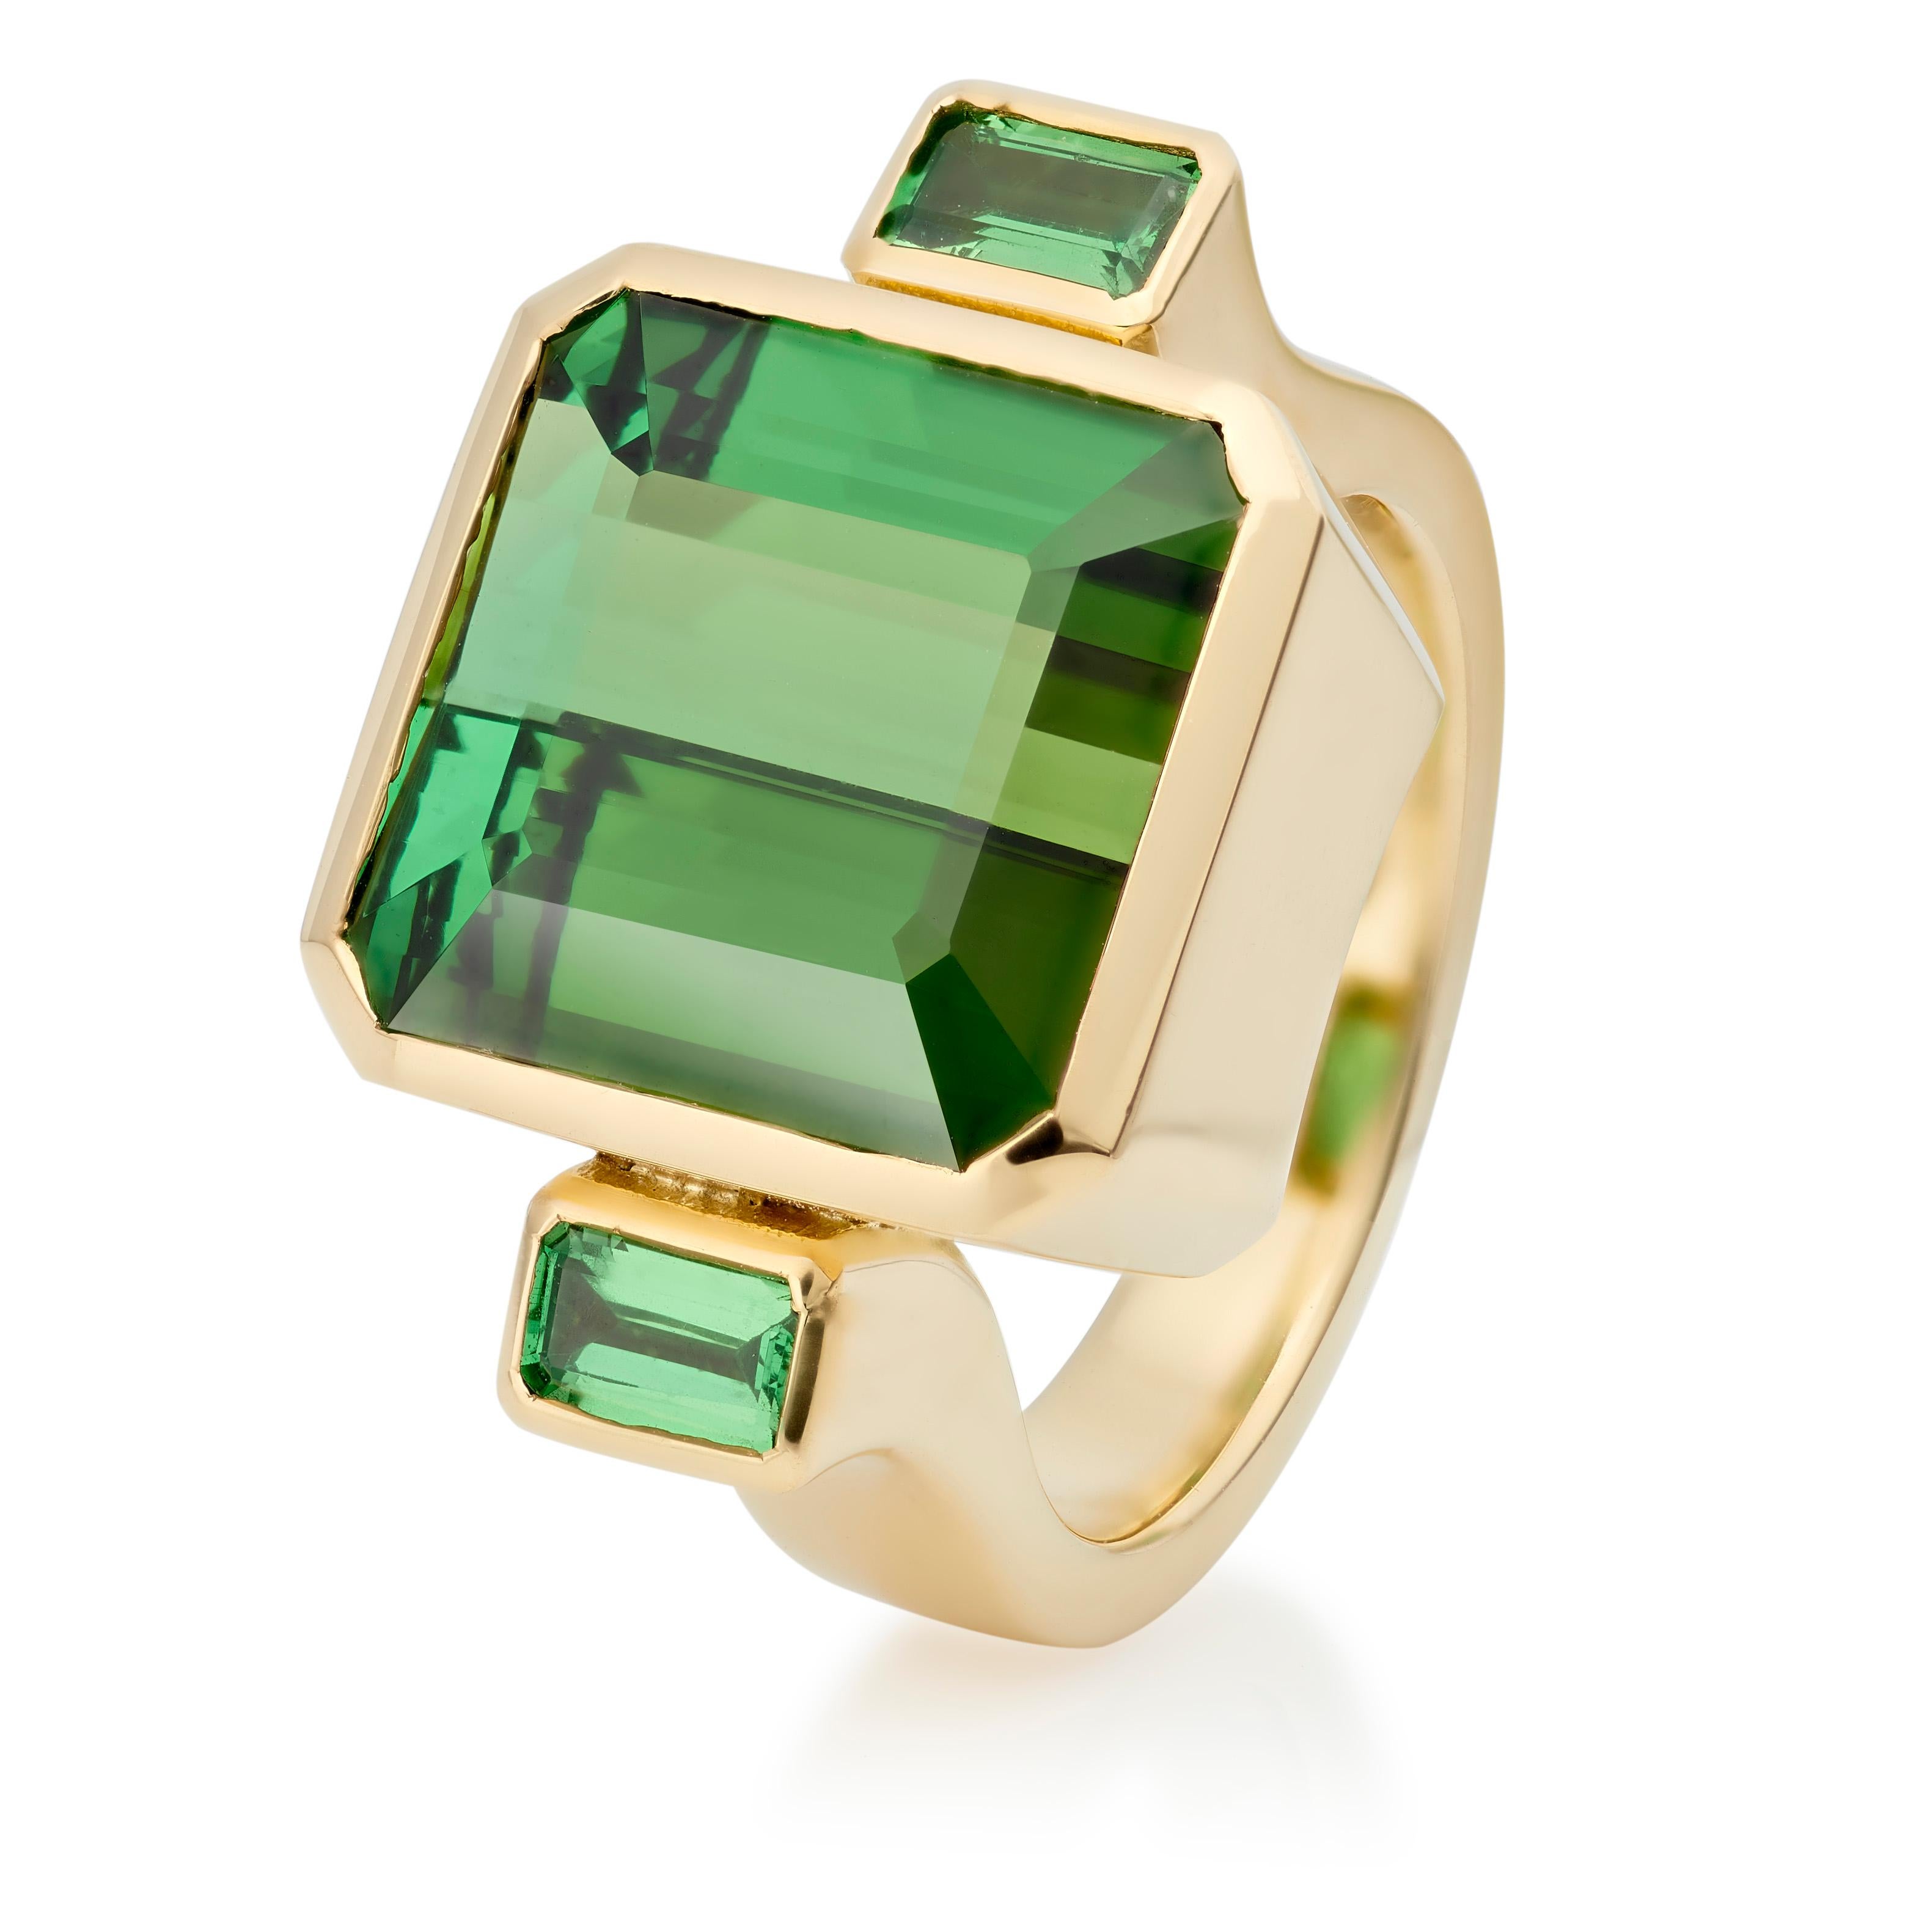 The Bon Bon Ring is one of Lilly Hastedt's signature rings. The design on this ring follows the squareness of the gemstones.  The central green Tourmaline is a huge stone weighing 11.56 cts. and is paired with a pair of sparkling baguette Tsavorite